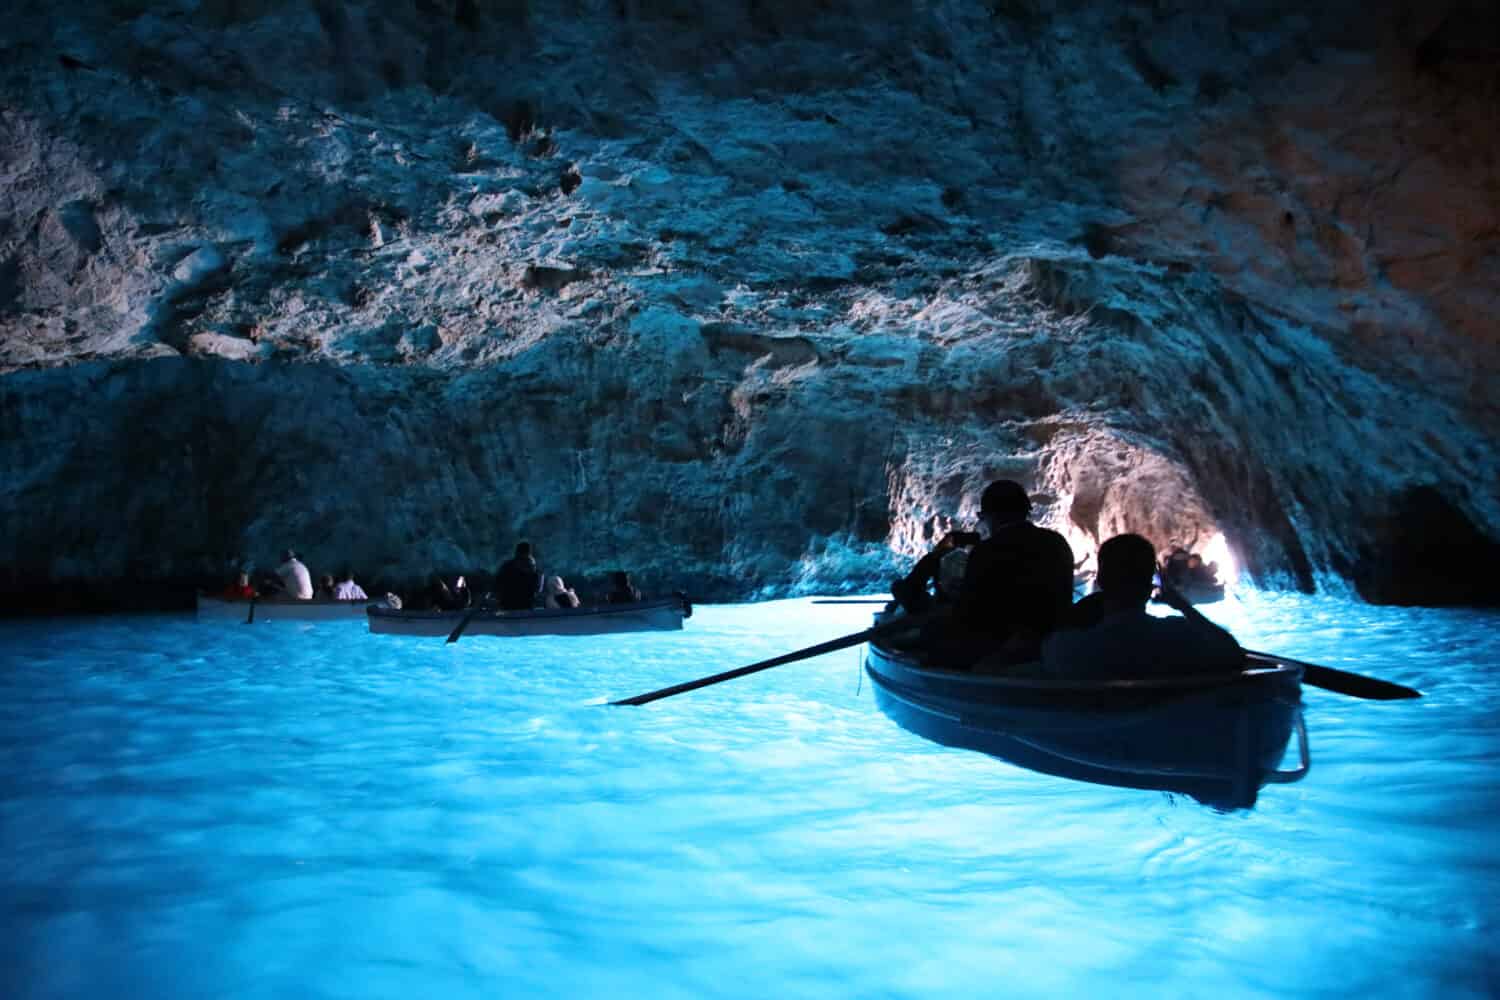 A photo of the Blue Grotto, Italy and people on a boat. 